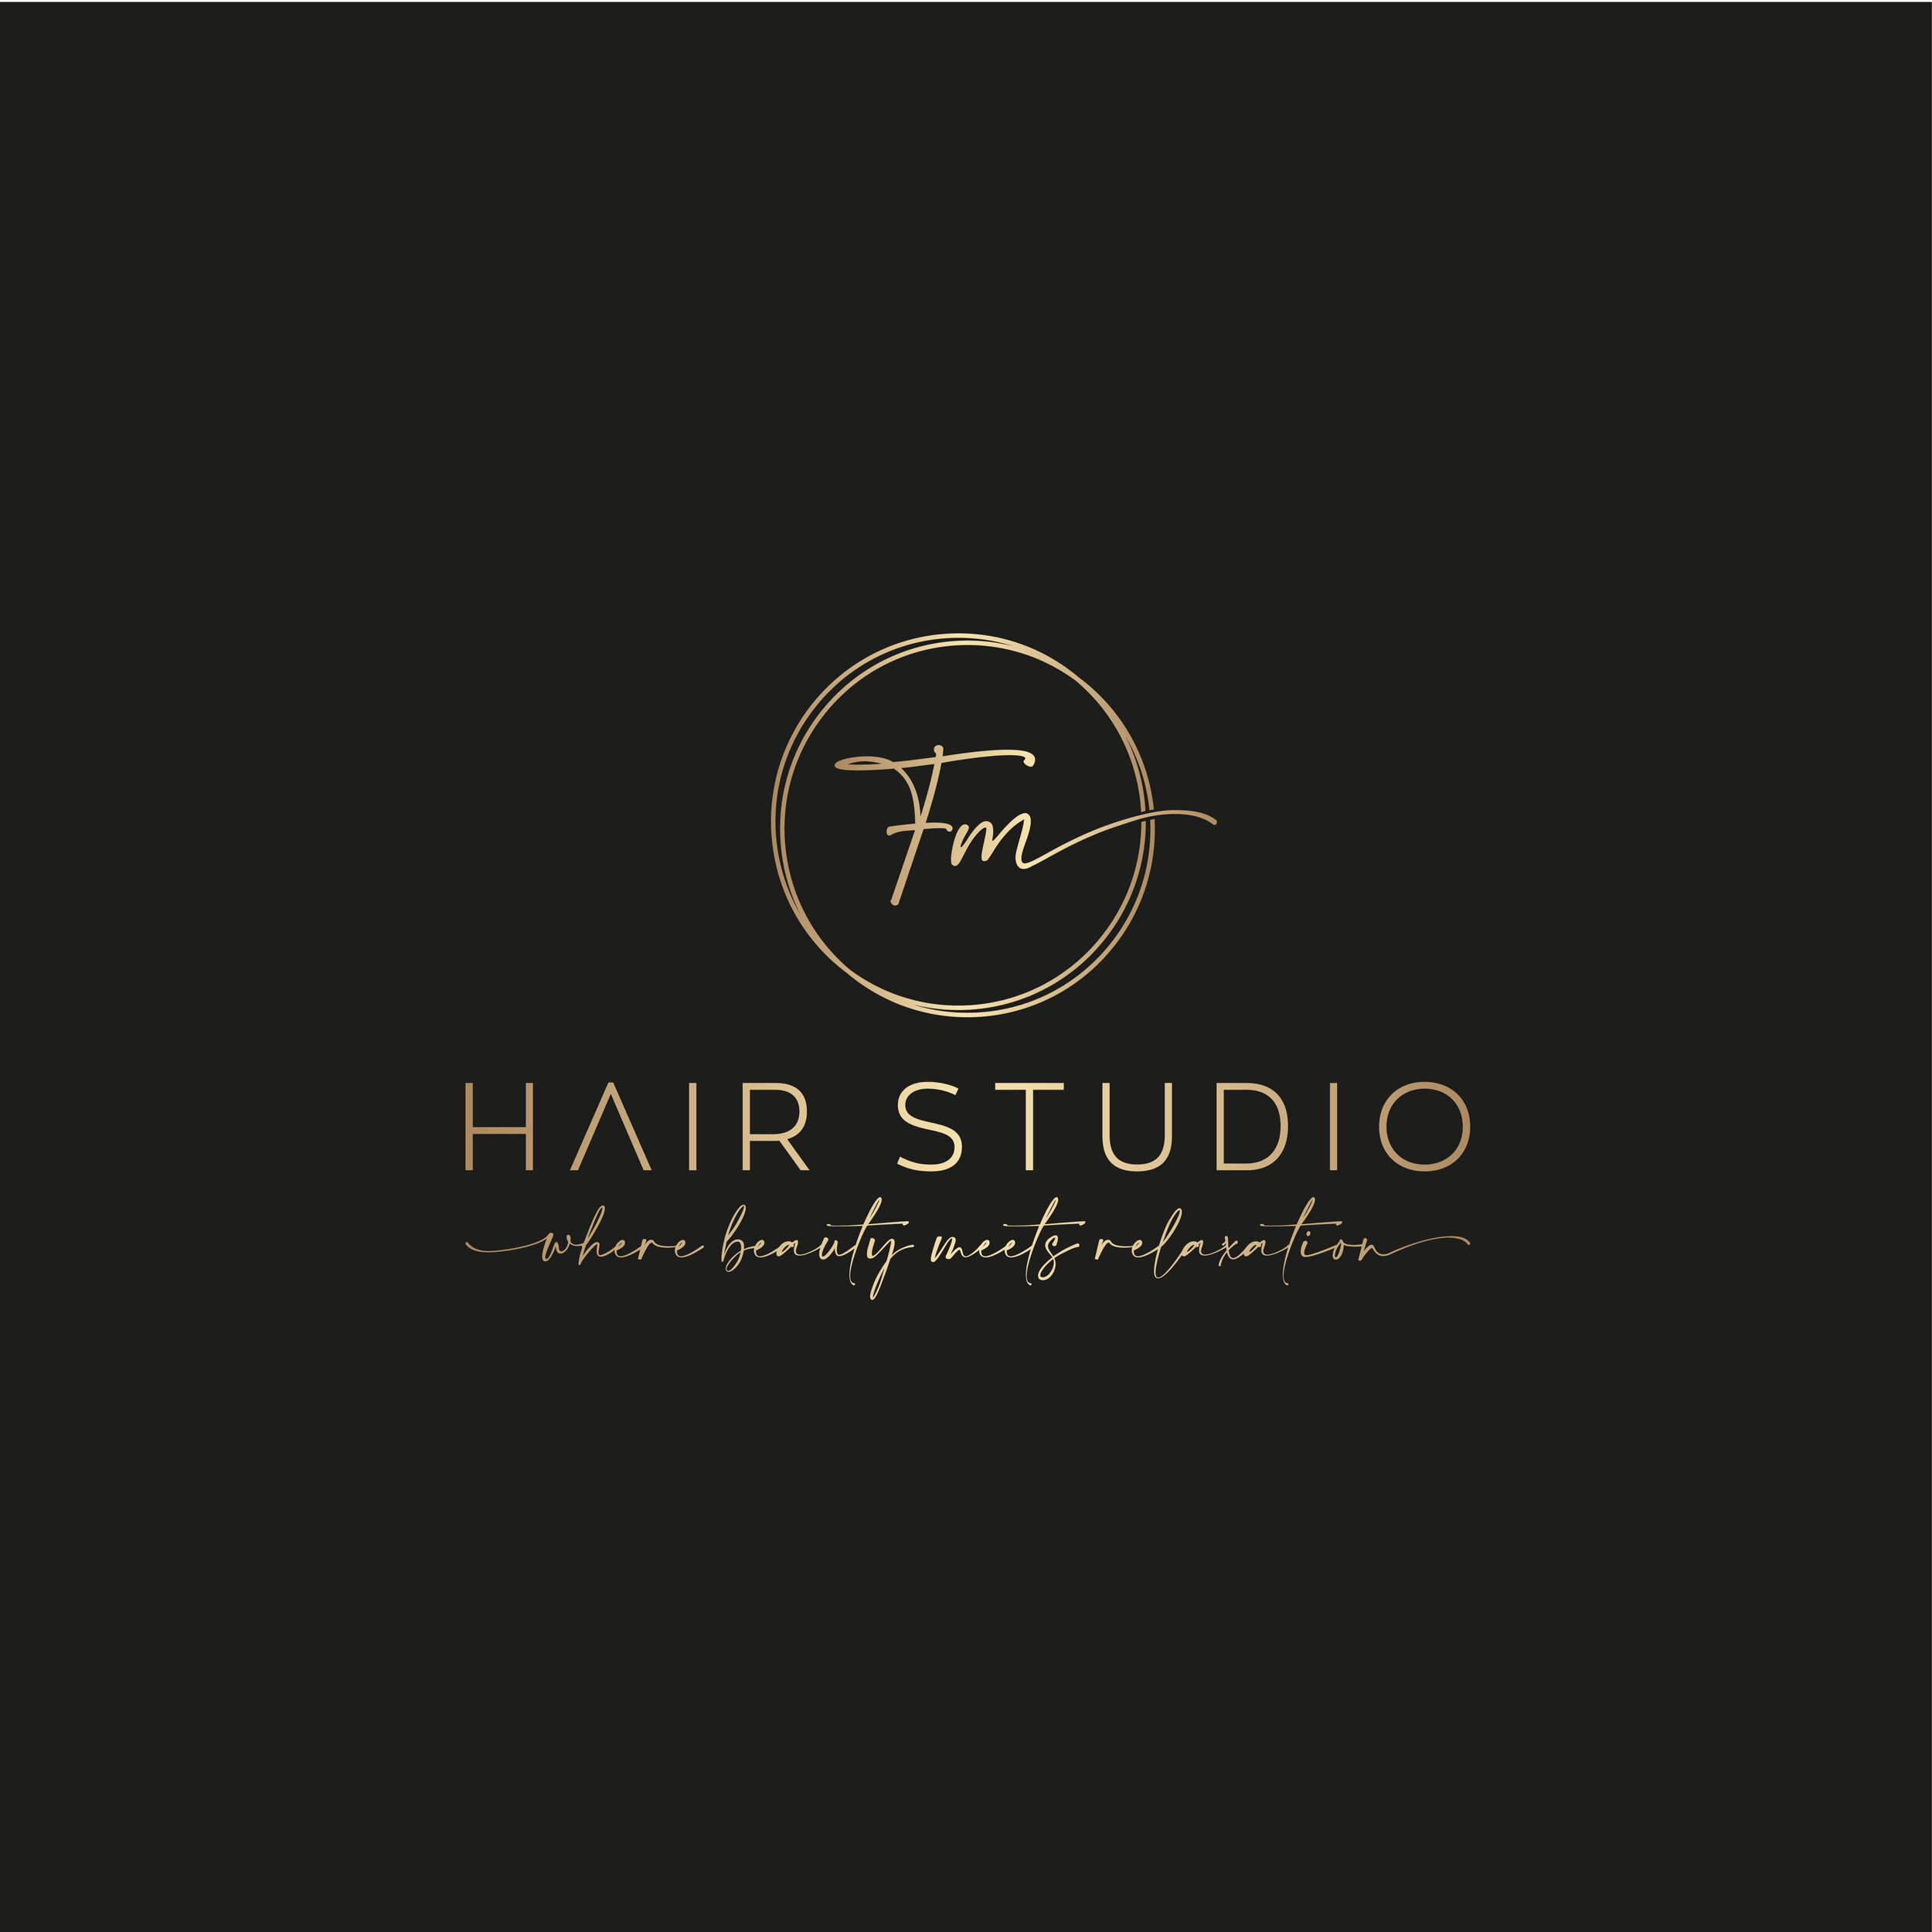 Hair salon logo with man and scissors Royalty Free Vector